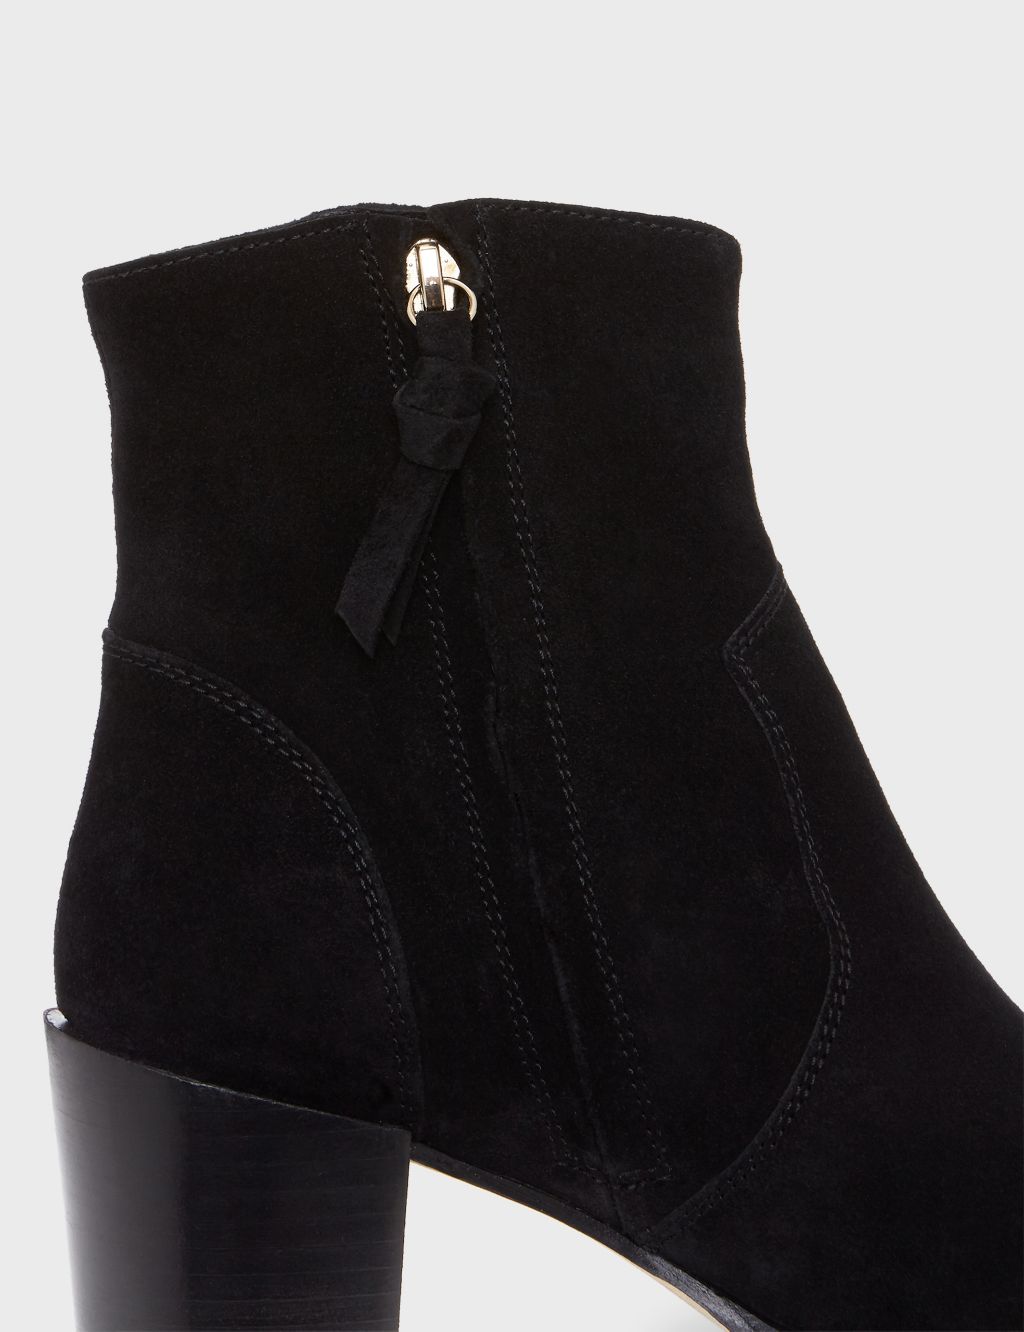 Suede Block Heel Round Toe Ankle Boots image 5